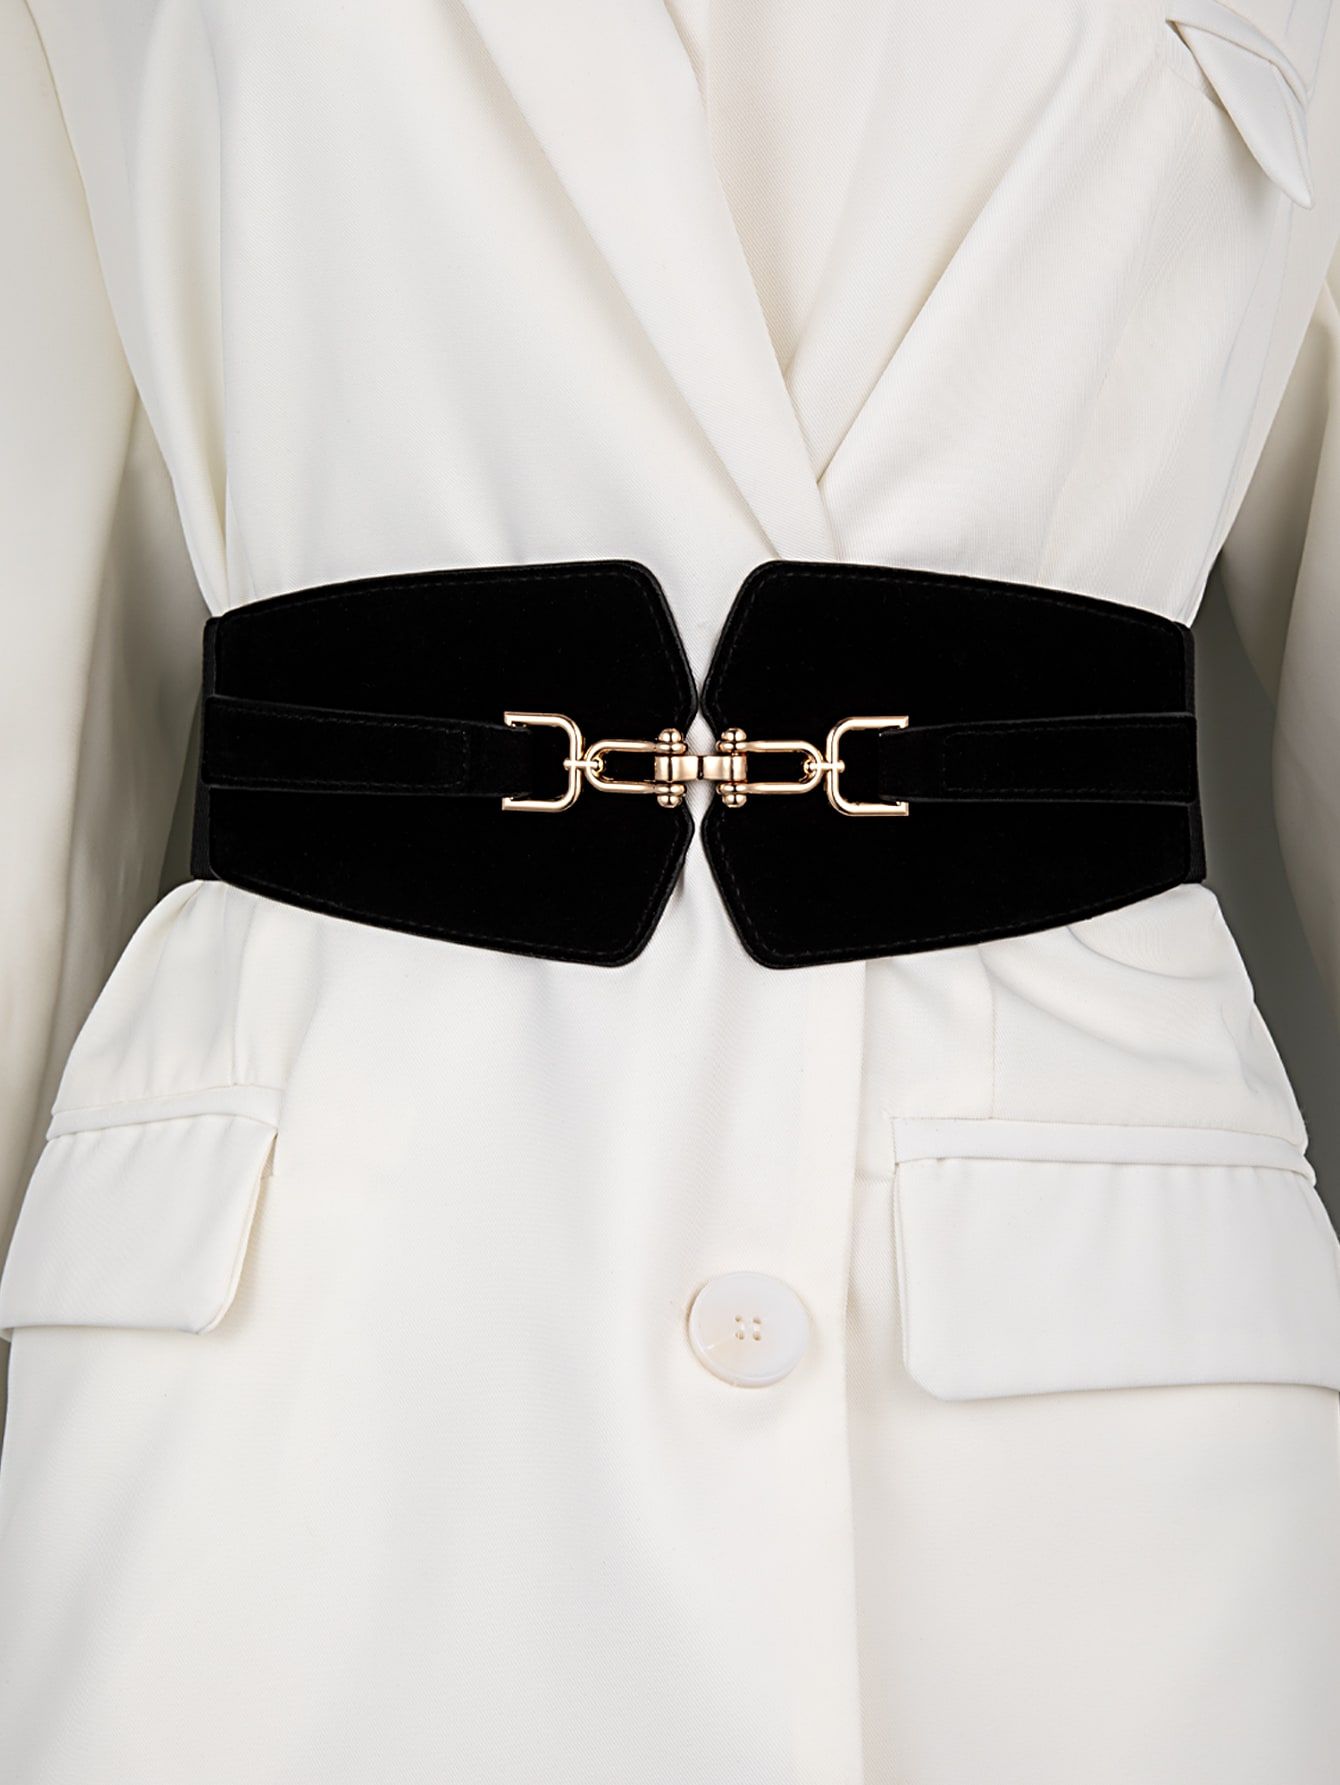 Accessorize in Style: Elevate Your Look with Wide Belts